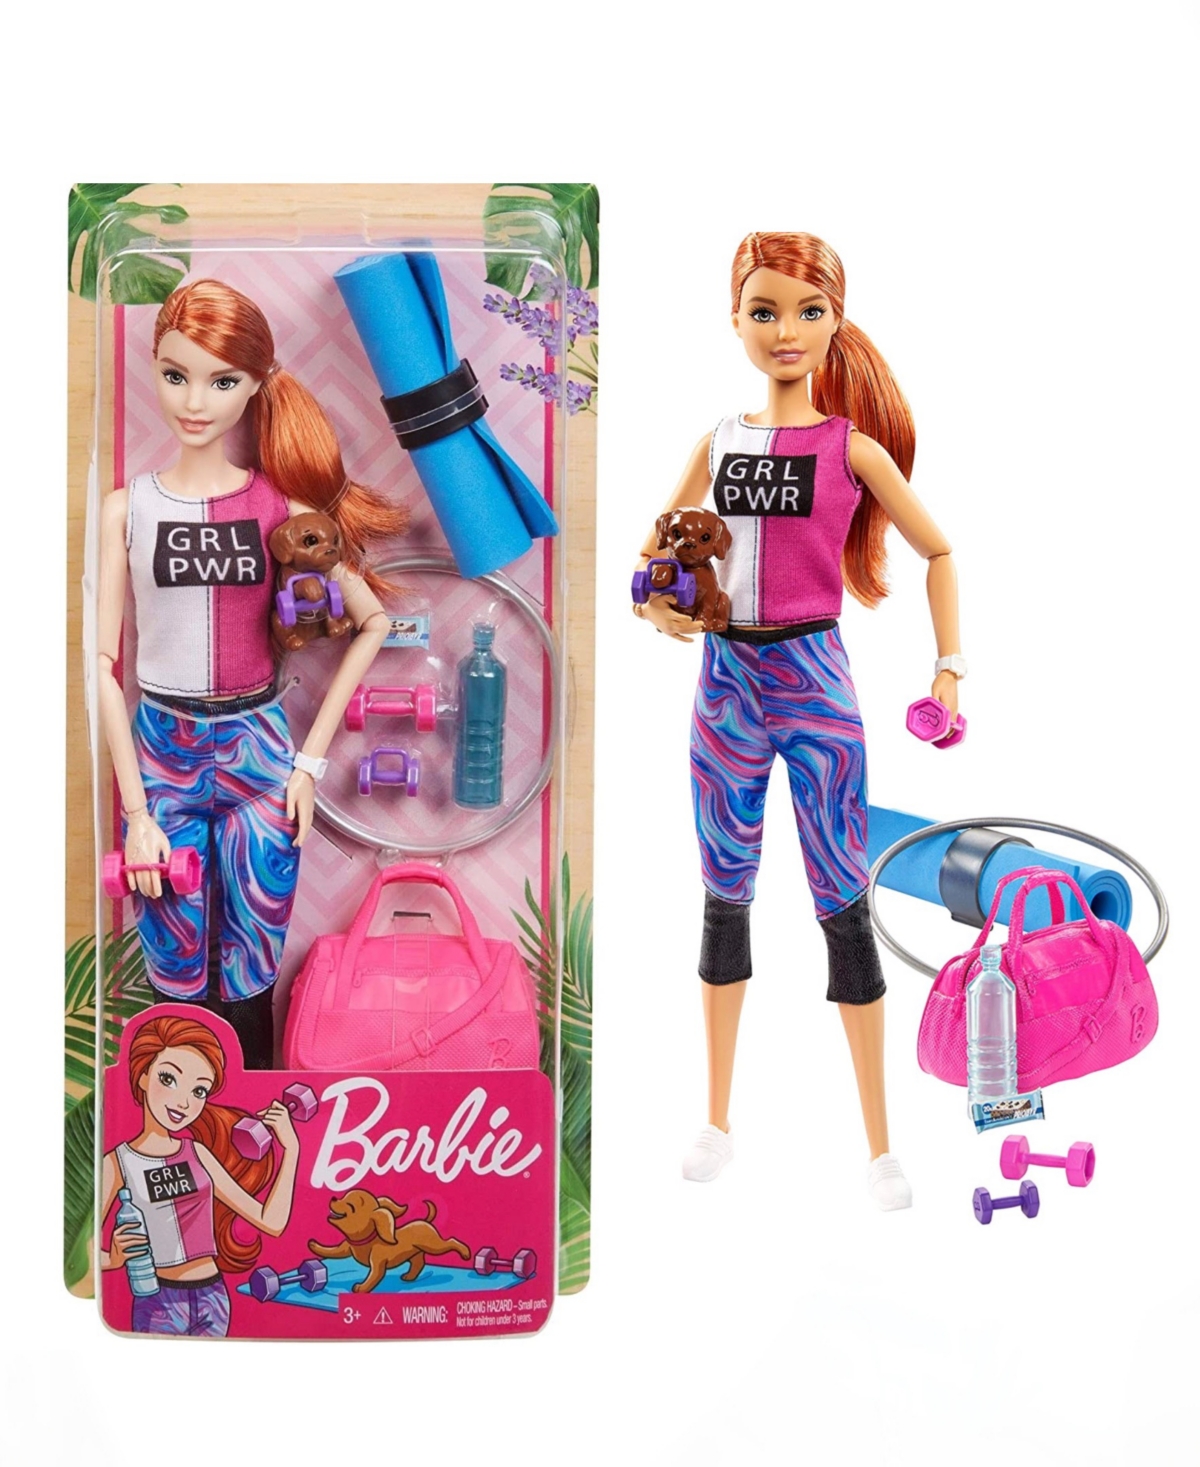 Barbie Babies' Puppy Loves Fitness With Red Haired Yoga  Set, 3 Piece In Multi Colored Plastic